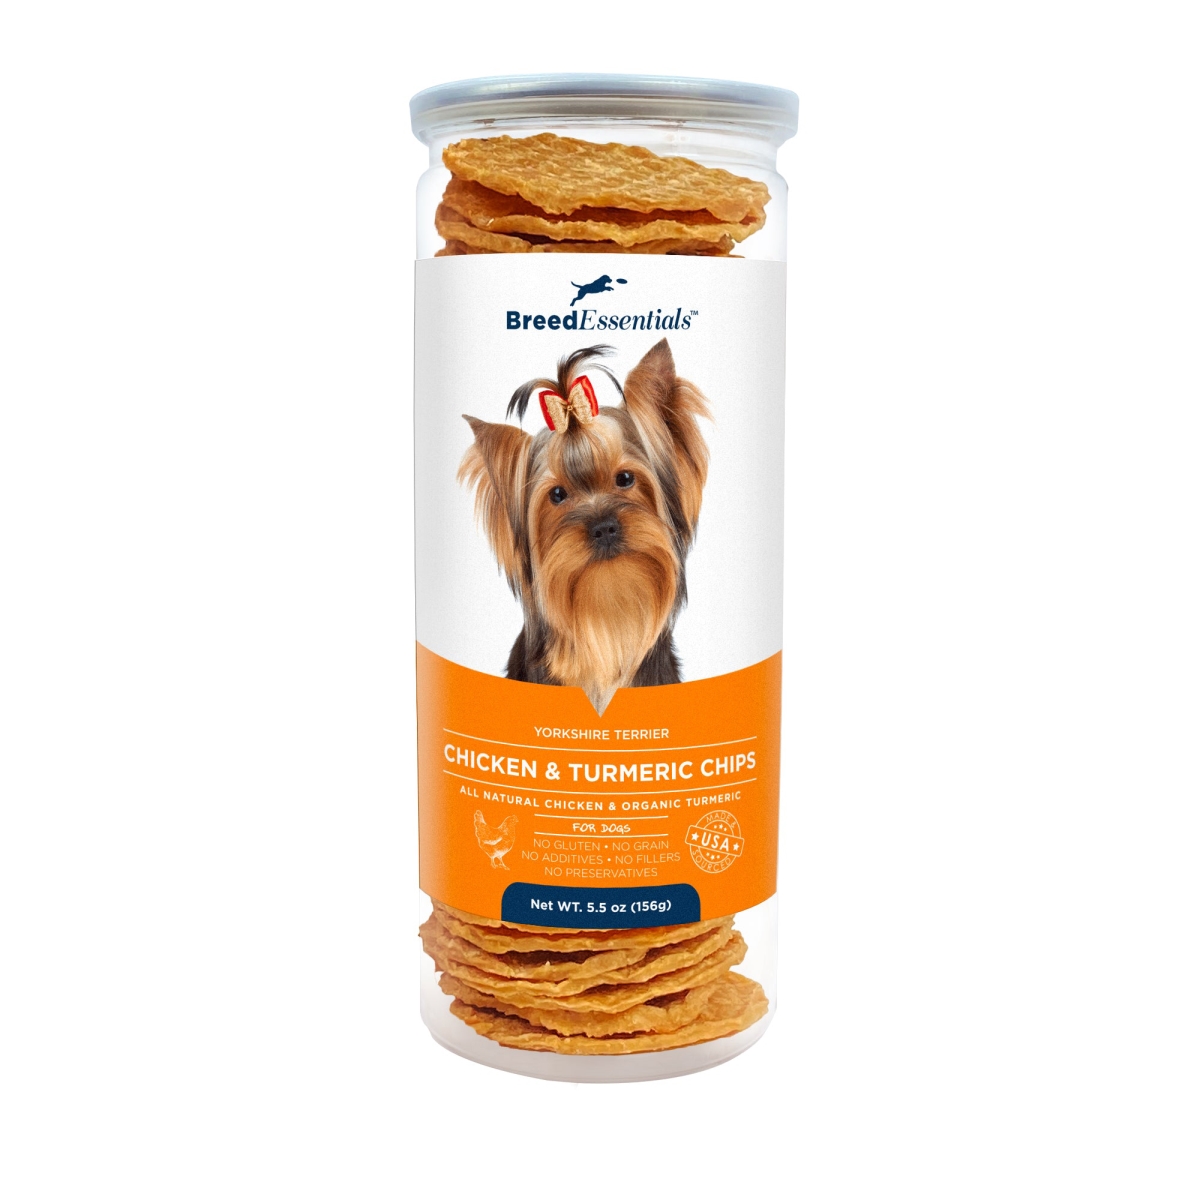 Picture of Breed Essentials 197247000242 5.5 oz Chicken & Turmeric Chips - Yorkshire Terrier